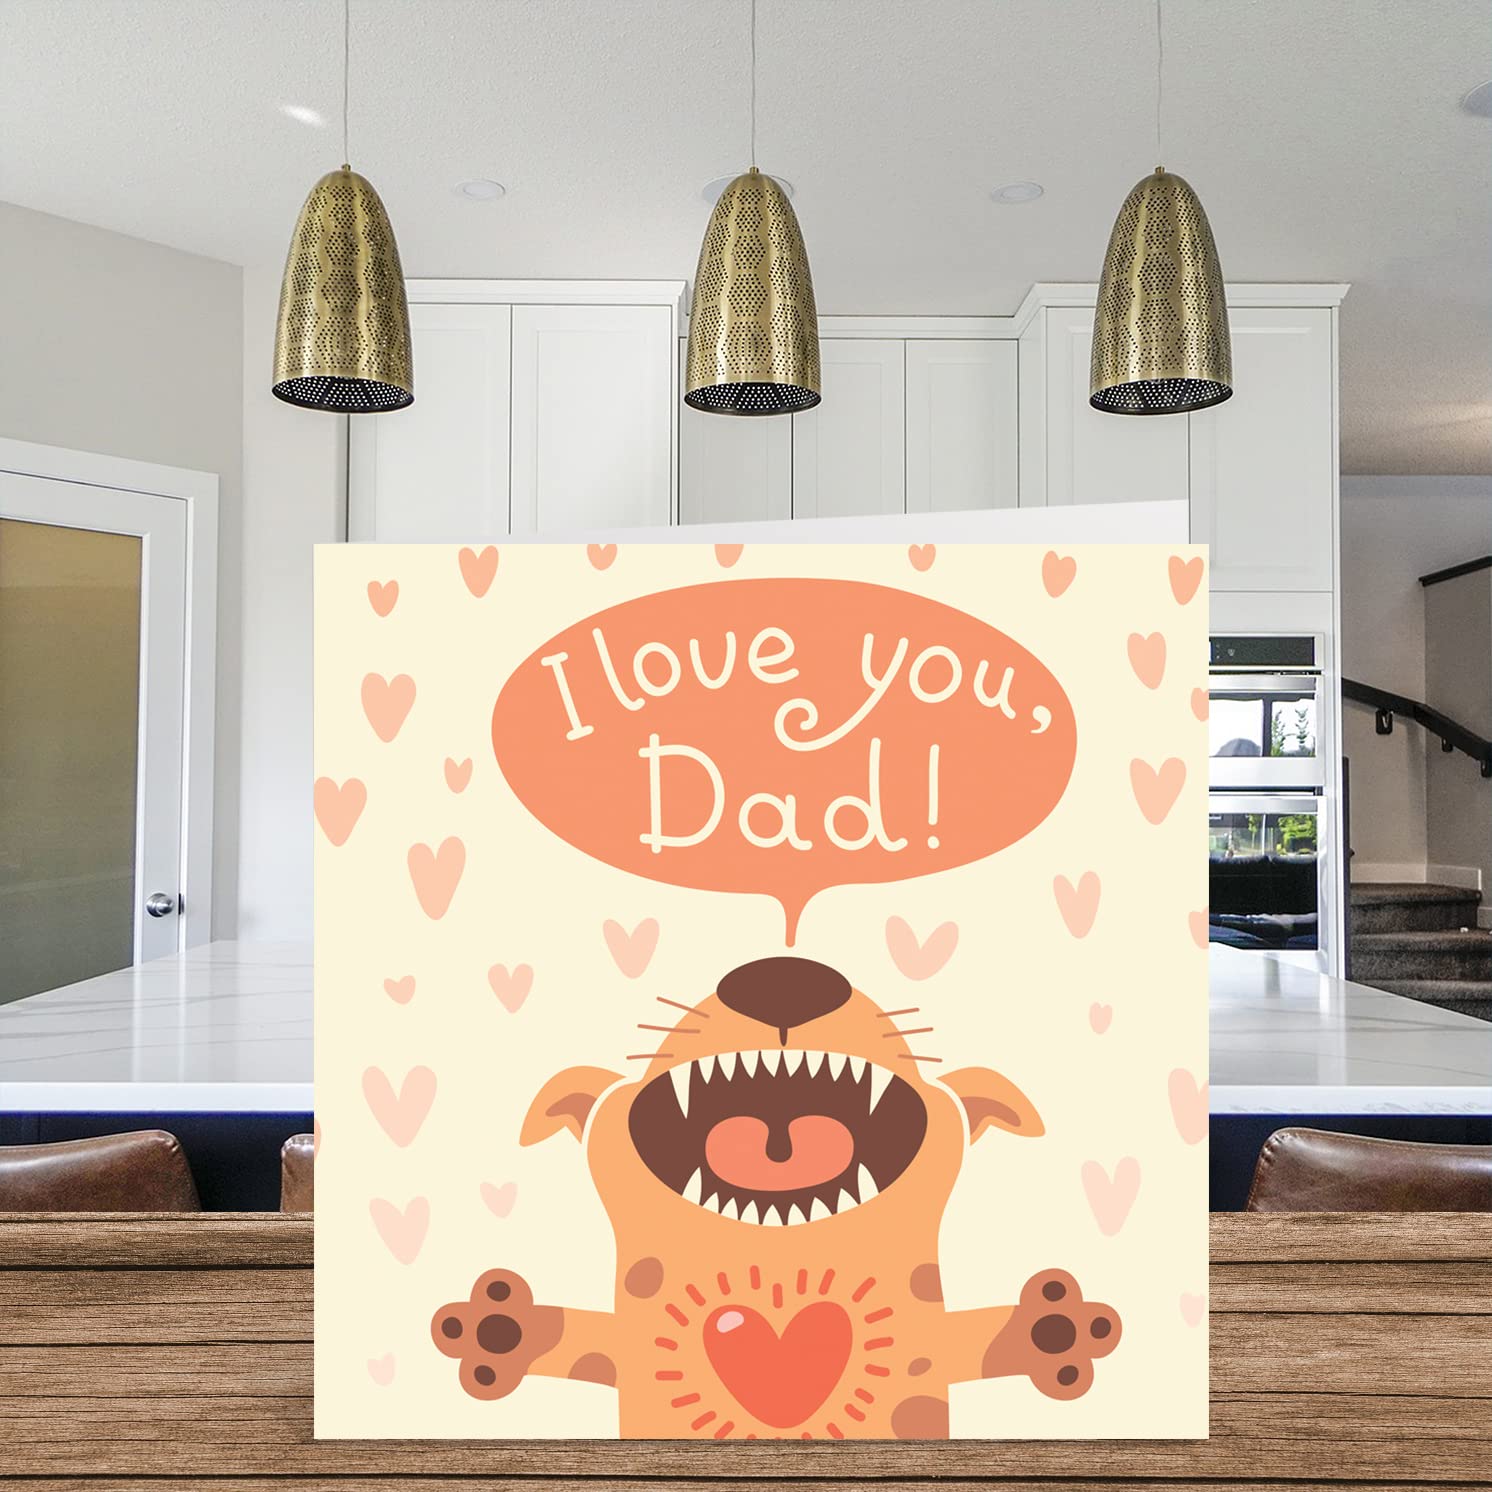 Birthday Cards for Dad from the Dog - I Love You Dad - Happy Birthday Card for Dad from the Dog, Father Birthday Gifts, 145mm x 145mm Father's Day Pet Greeting Cards Gift for Daddy Papa